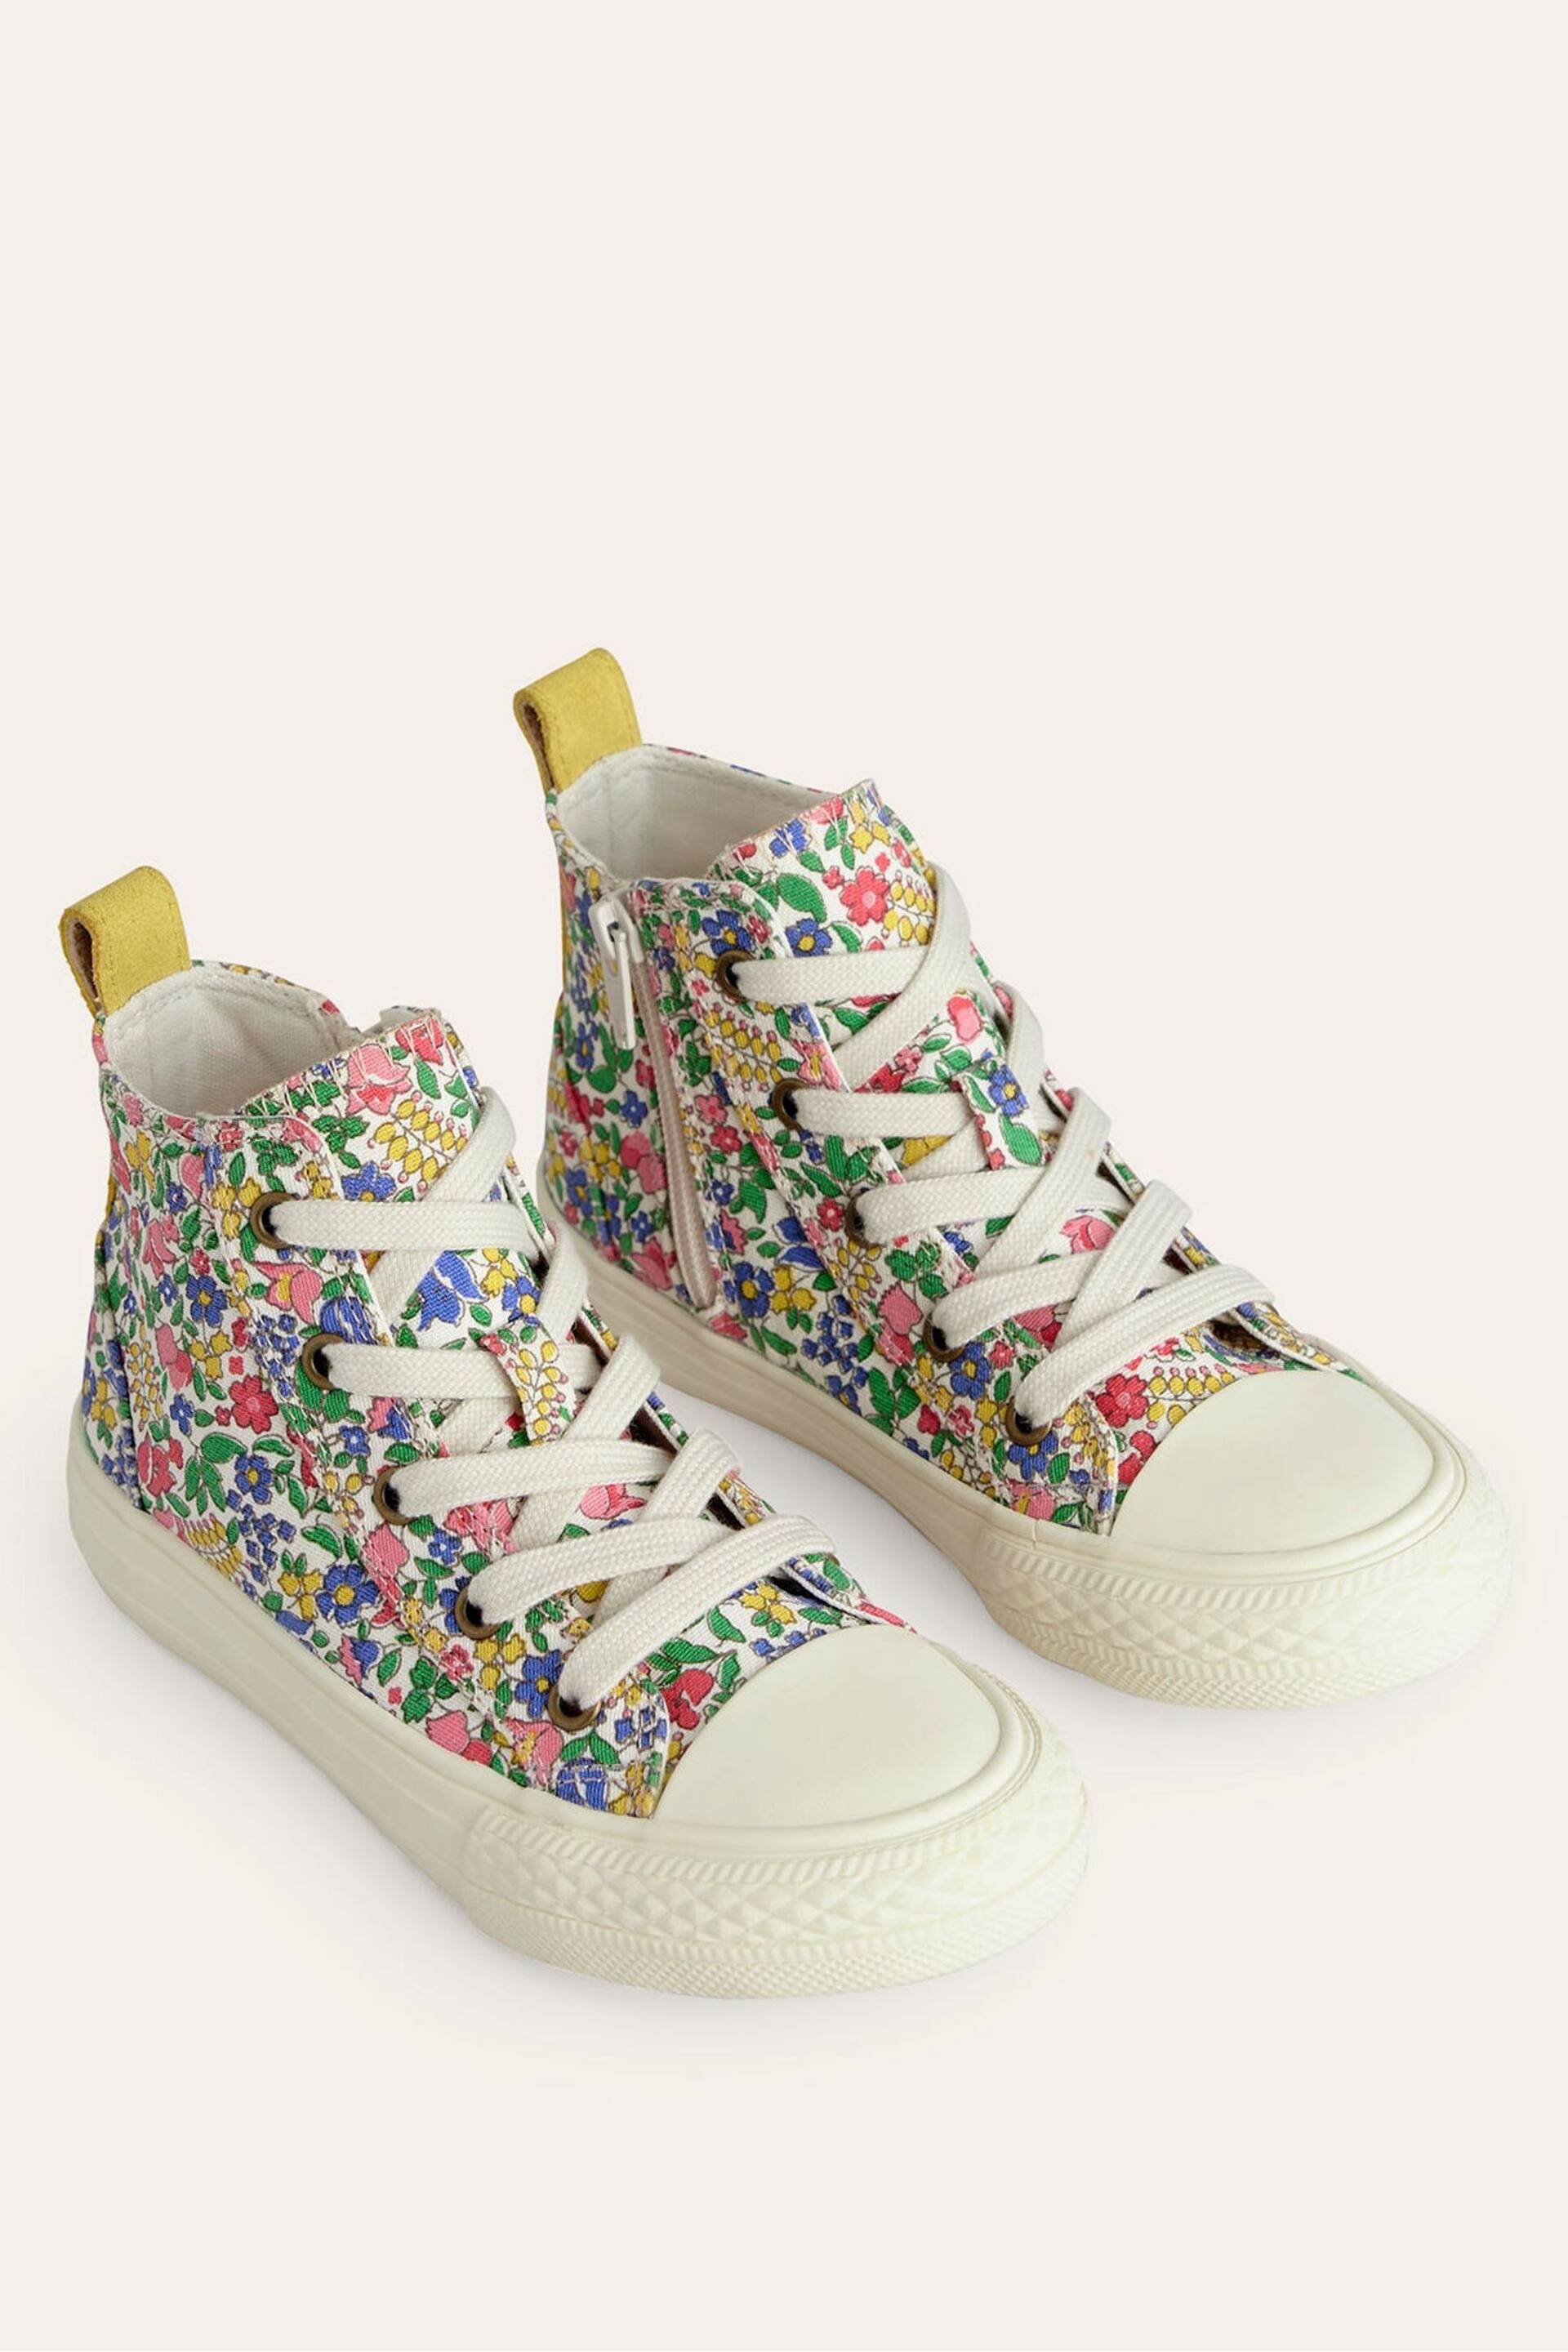 Boden Blue Canvas High Top - Image 1 of 3